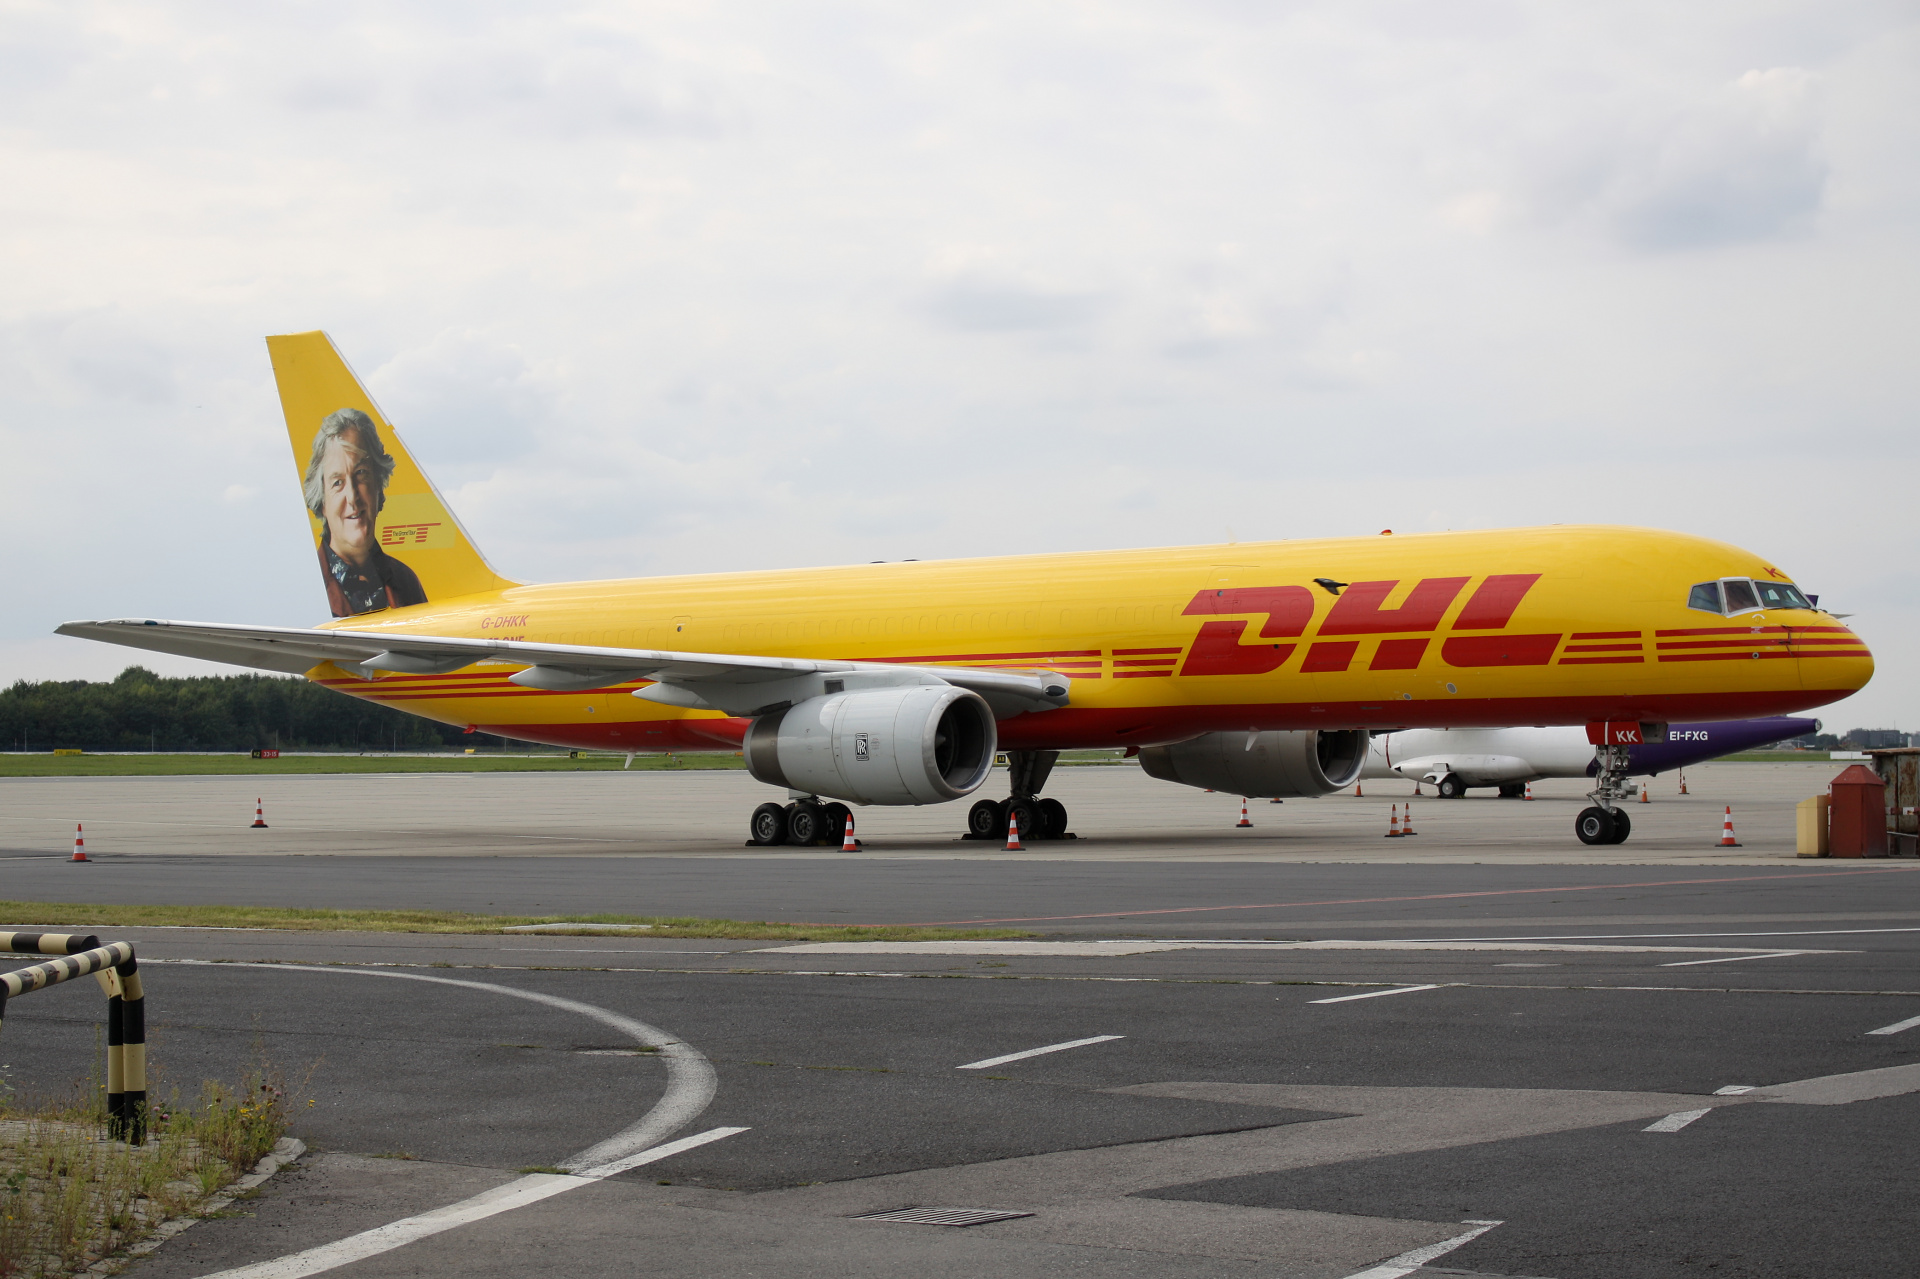 PCF, G-DHKK, DHL Air (Hair Force One livery) (Aircraft » EPWA Spotting » Boeing 757-200F » DHL)